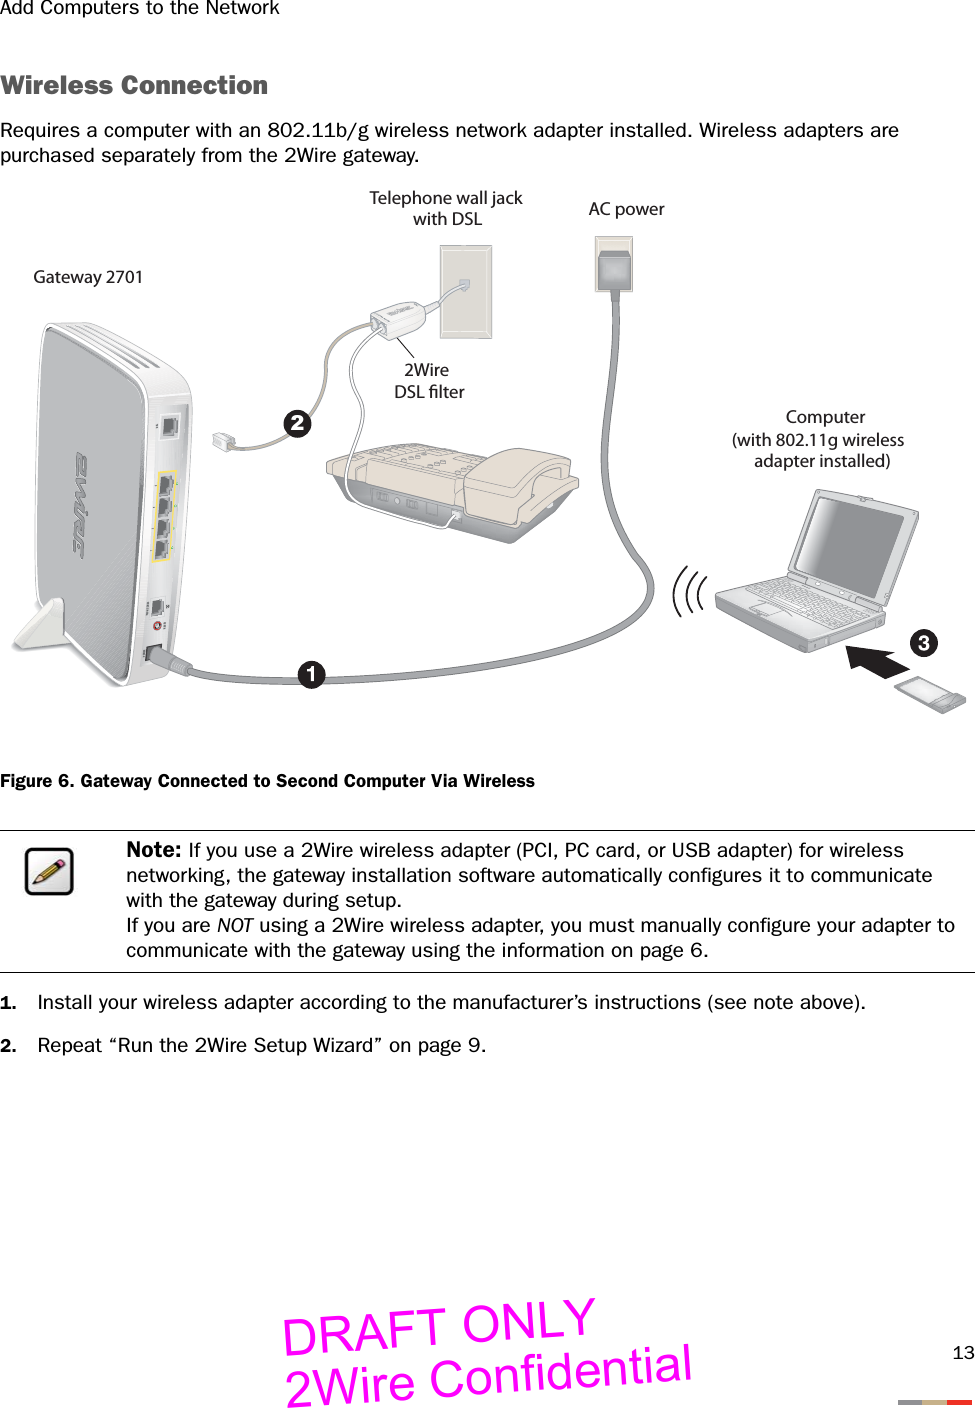 Add Computers to the Network13Wireless ConnectionRequires a computer with an 802.11b/g wireless network adapter installed. Wireless adapters are purchased separately from the 2Wire gateway.Figure 6. Gateway Connected to Second Computer Via Wireless1. Install your wireless adapter according to the manufacturer’s instructions (see note above).2. Repeat “Run the 2Wire Setup Wizard” on page 9.Note: If you use a 2Wire wireless adapter (PCI, PC card, or USB adapter) for wireless networking, the gateway installation software automatically configures it to communicate with the gateway during setup. If you are NOT using a 2Wire wireless adapter, you must manually configure your adapter to communicate with the gateway using the information on page 6.DSLPHONE LINESPOWERRESET2AC power2Wire DSL lterTelephone wall jackwith DSLComputer(with 802.11g wirelessadapter installed)Gateway 2701DRAFT ONLY2Wire Confidential